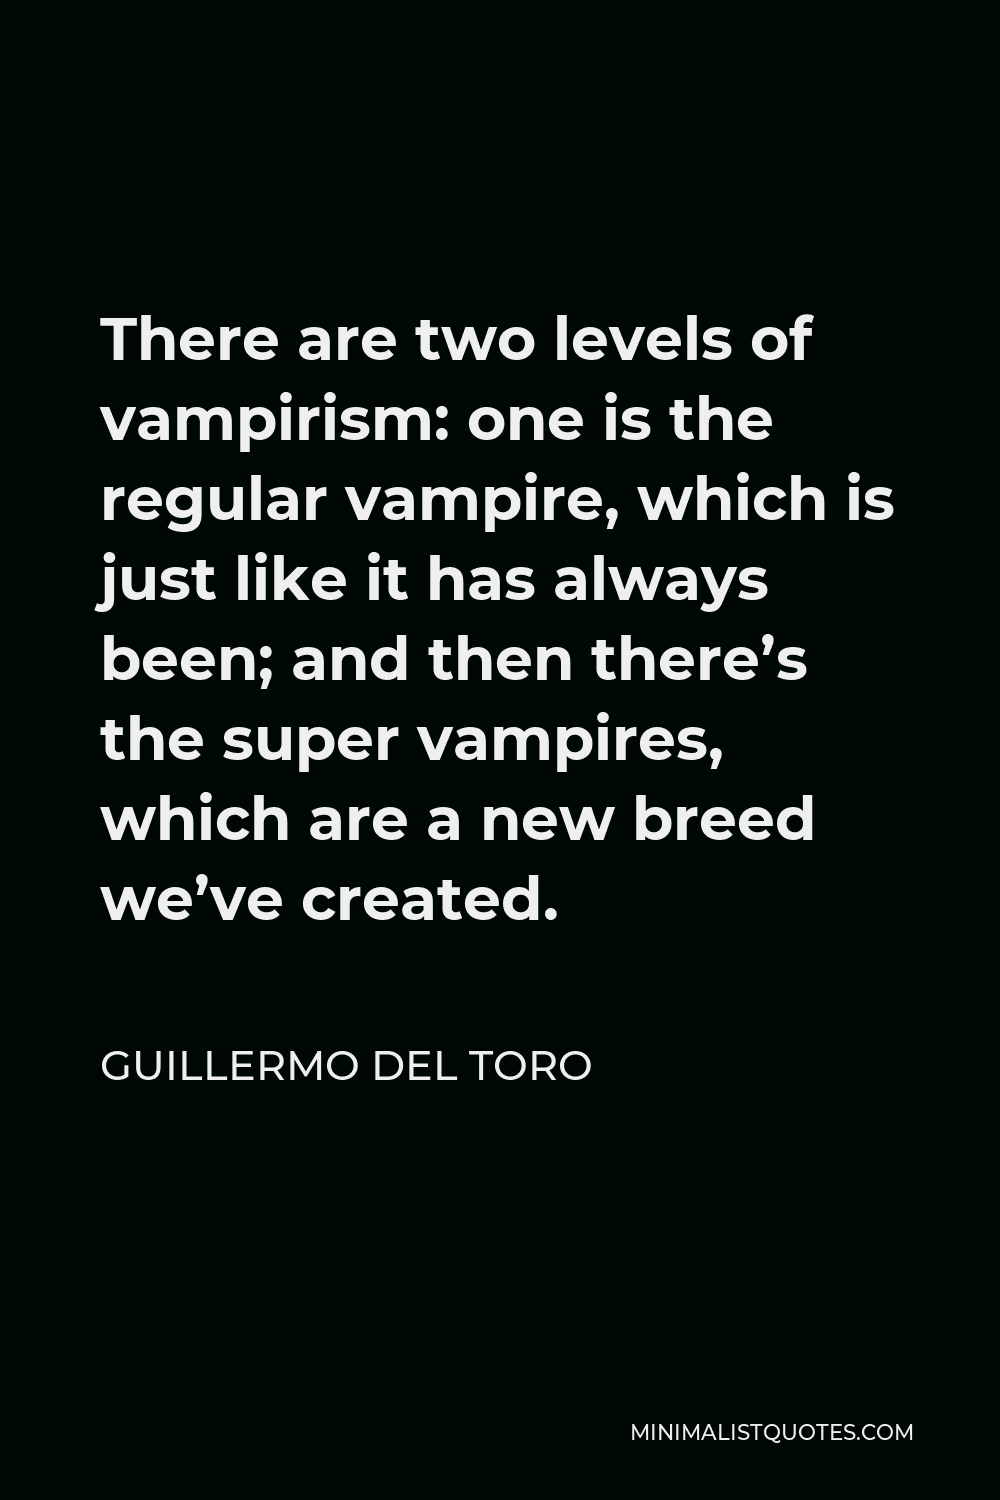 Guillermo del Toro Quote - There are two levels of vampirism: one is the regular vampire, which is just like it has always been; and then there’s the super vampires, which are a new breed we’ve created.